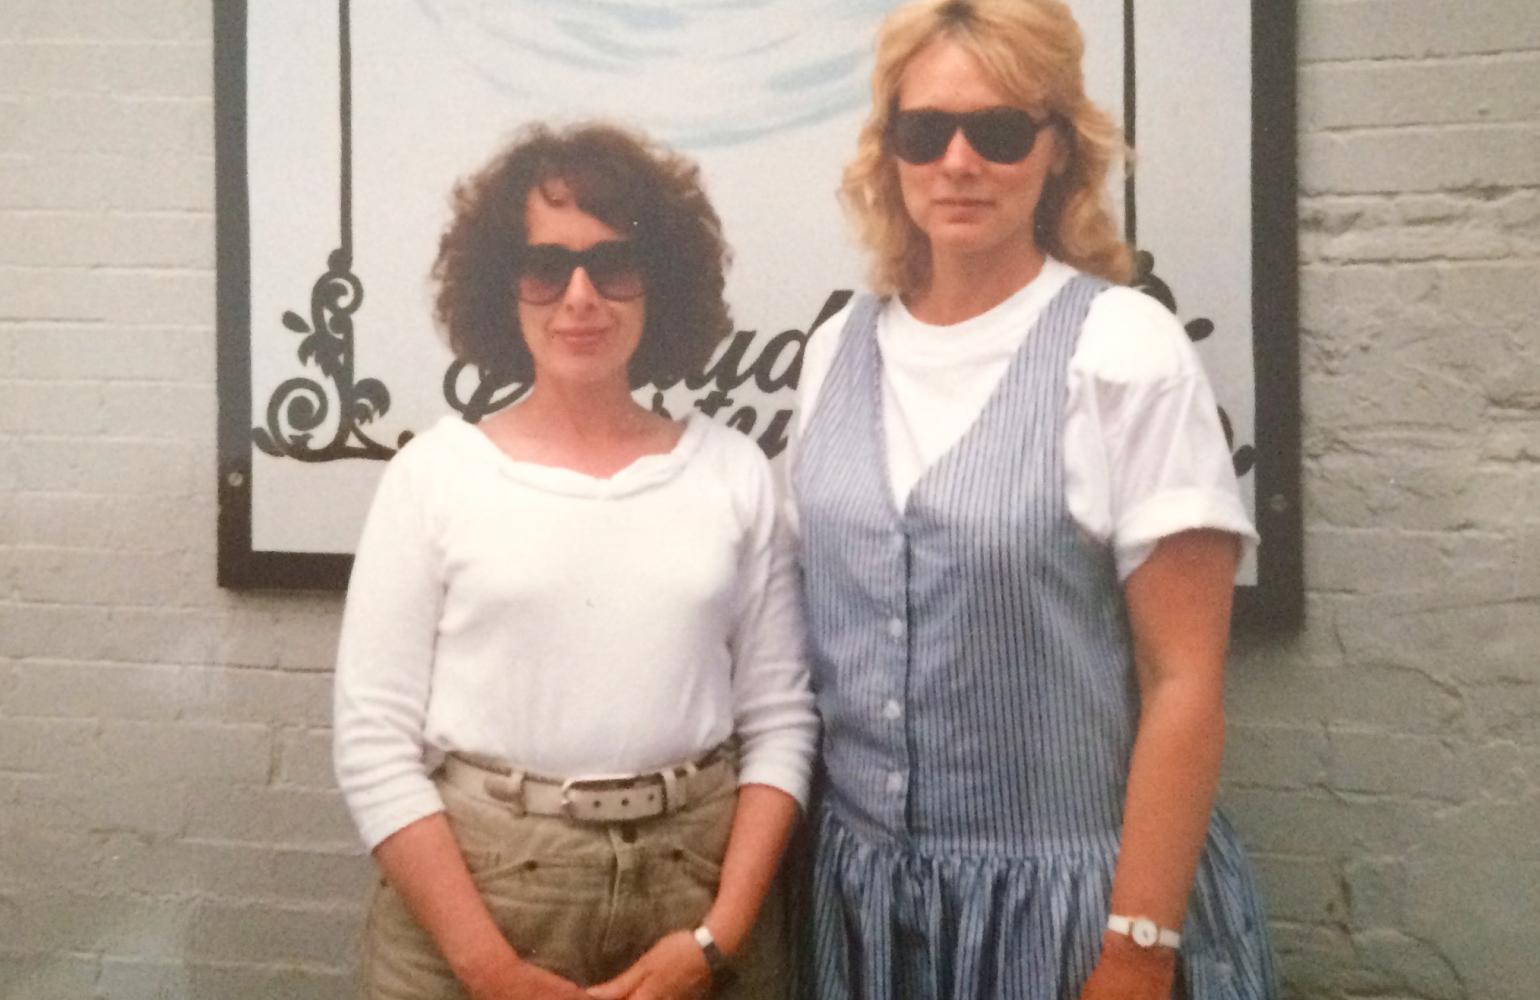 Me and Jean Hester in Nashville. I hired her as production manager and she was so fantastic she became co-producer. And my friend to this day.